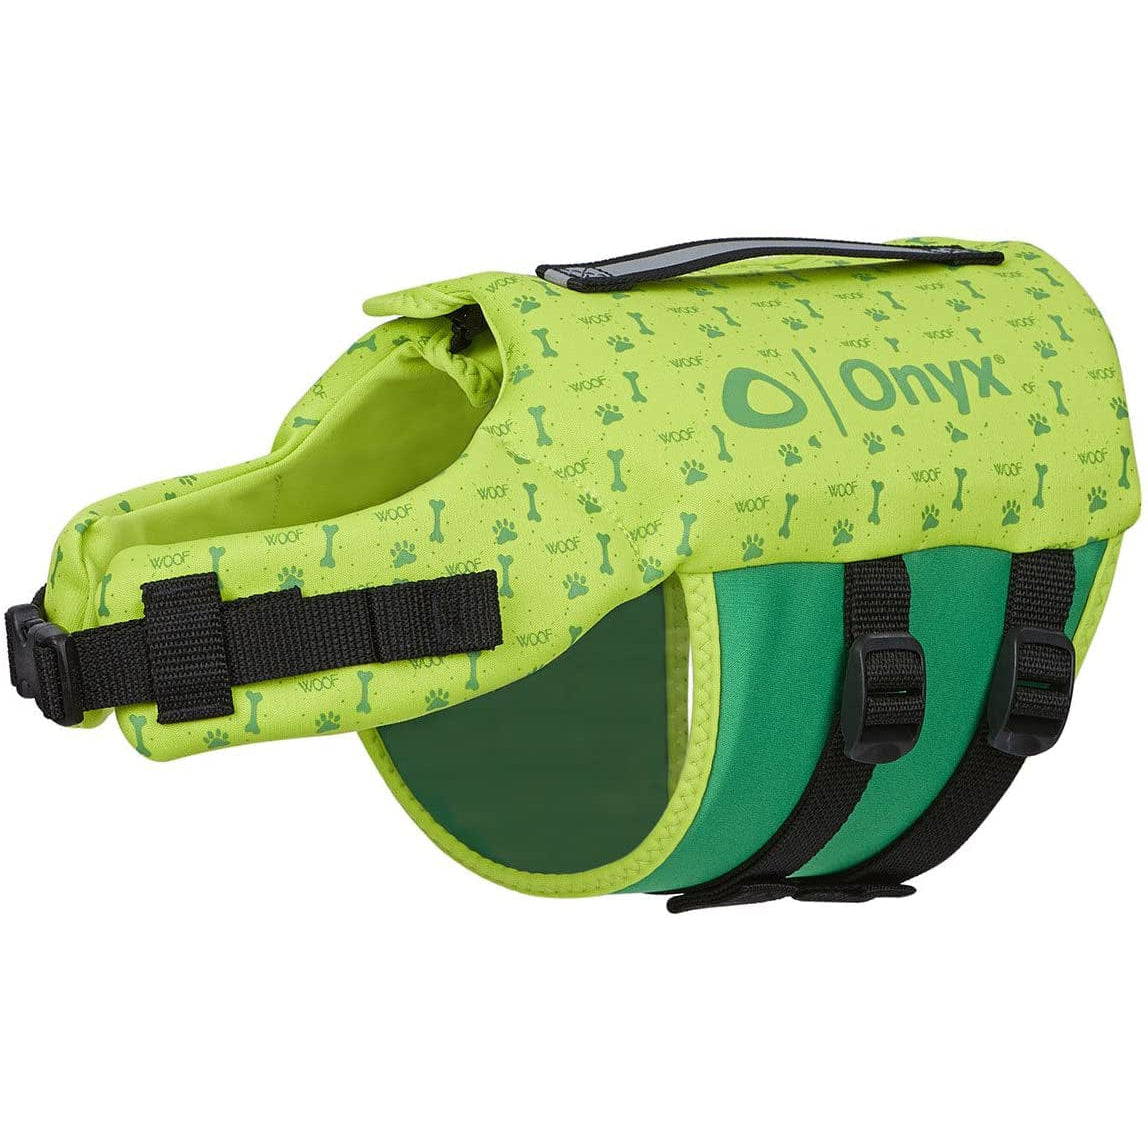 Full Throttle Qualifies for Free Shipping Full Throttle Vest Pet Neo XL Green 80-up lb #157200-400-050-19